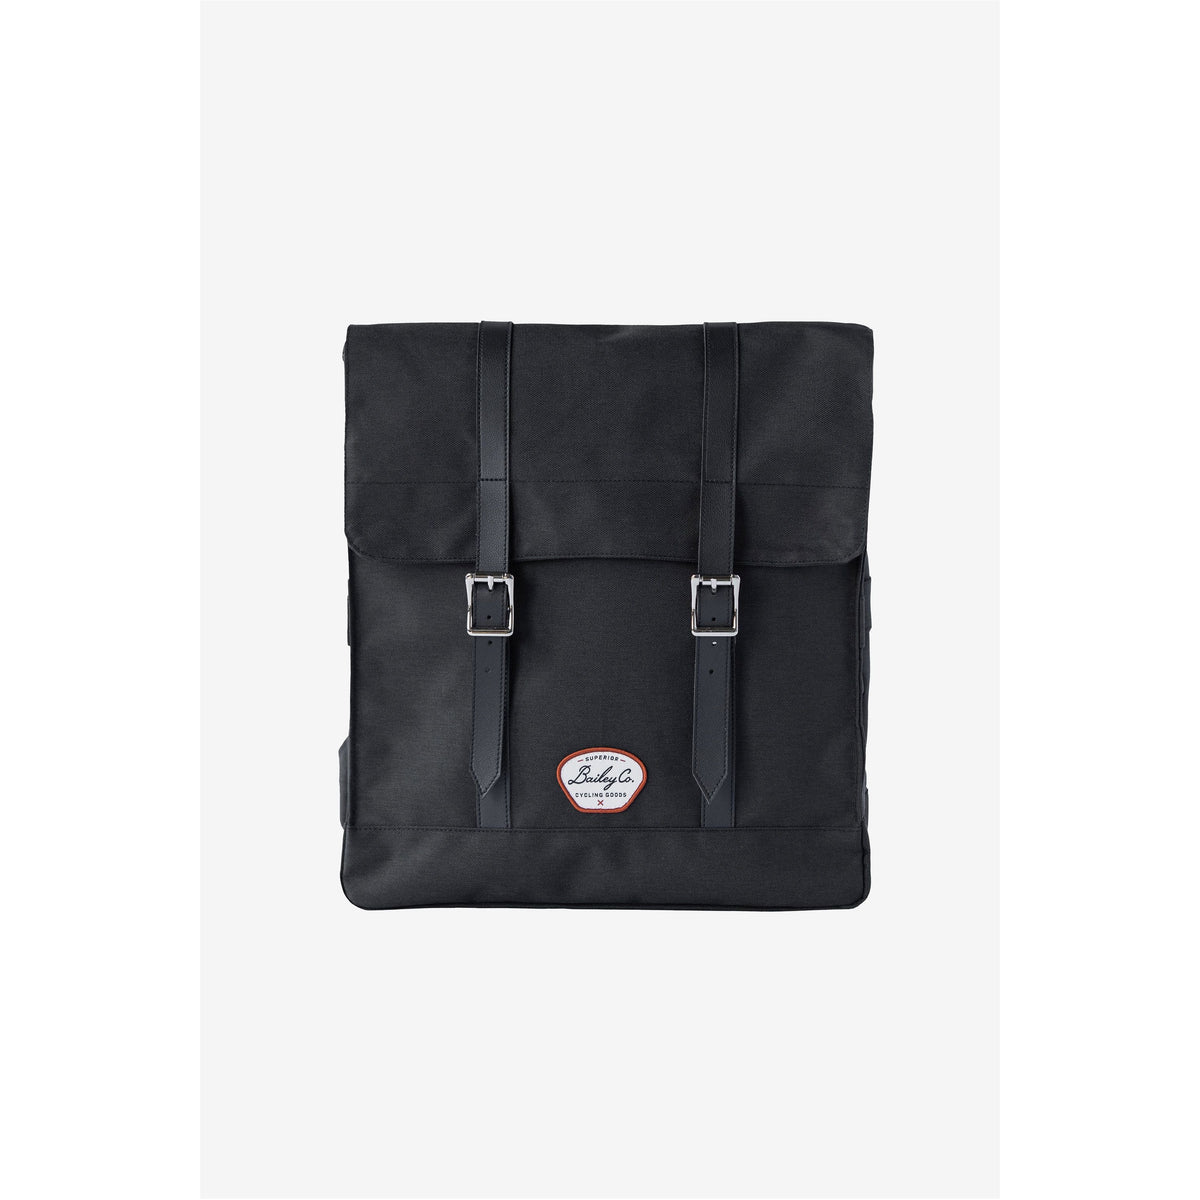 Bailey Co Richmond Convertible Pannier Backpack in Black front